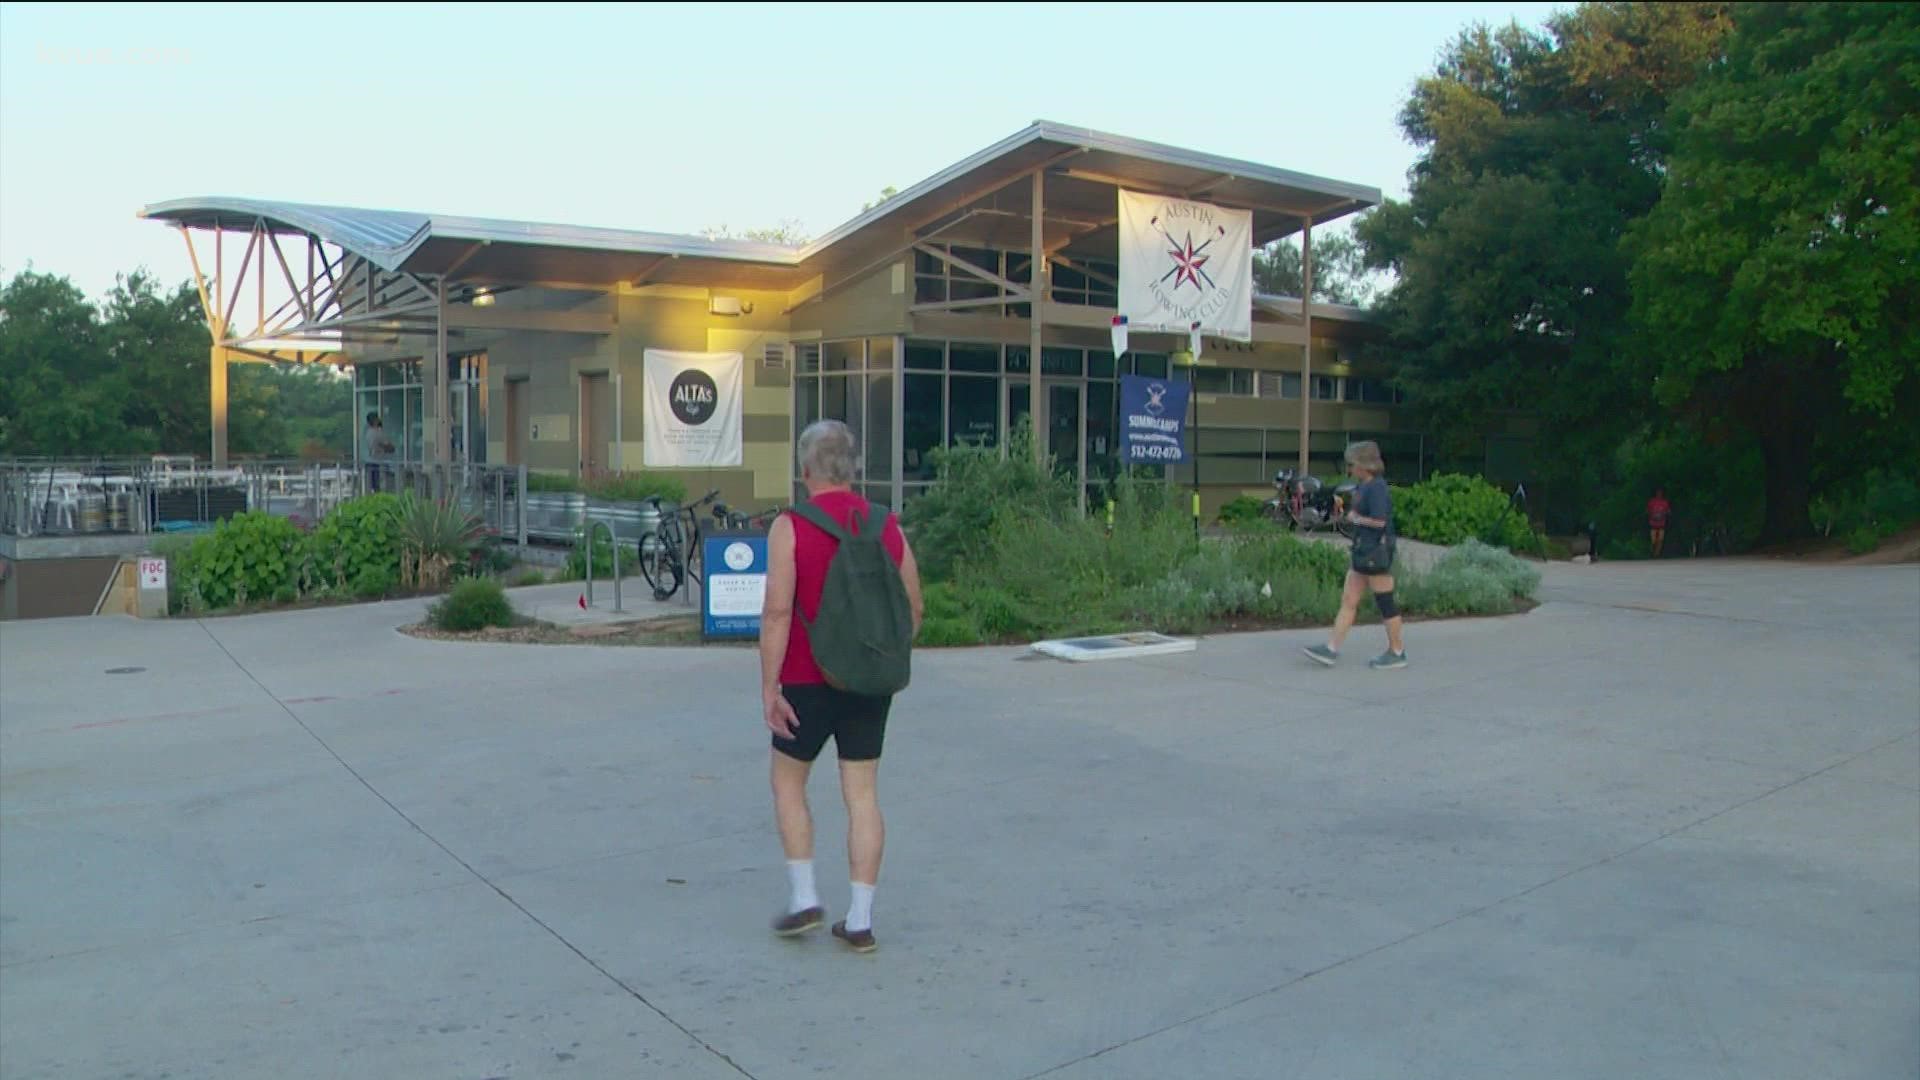 Plans to relocate the Waller Creek Boathouse are moving forward as Austin's planned light rail system takes shape. KVUE's Bryce Newberry has the details.